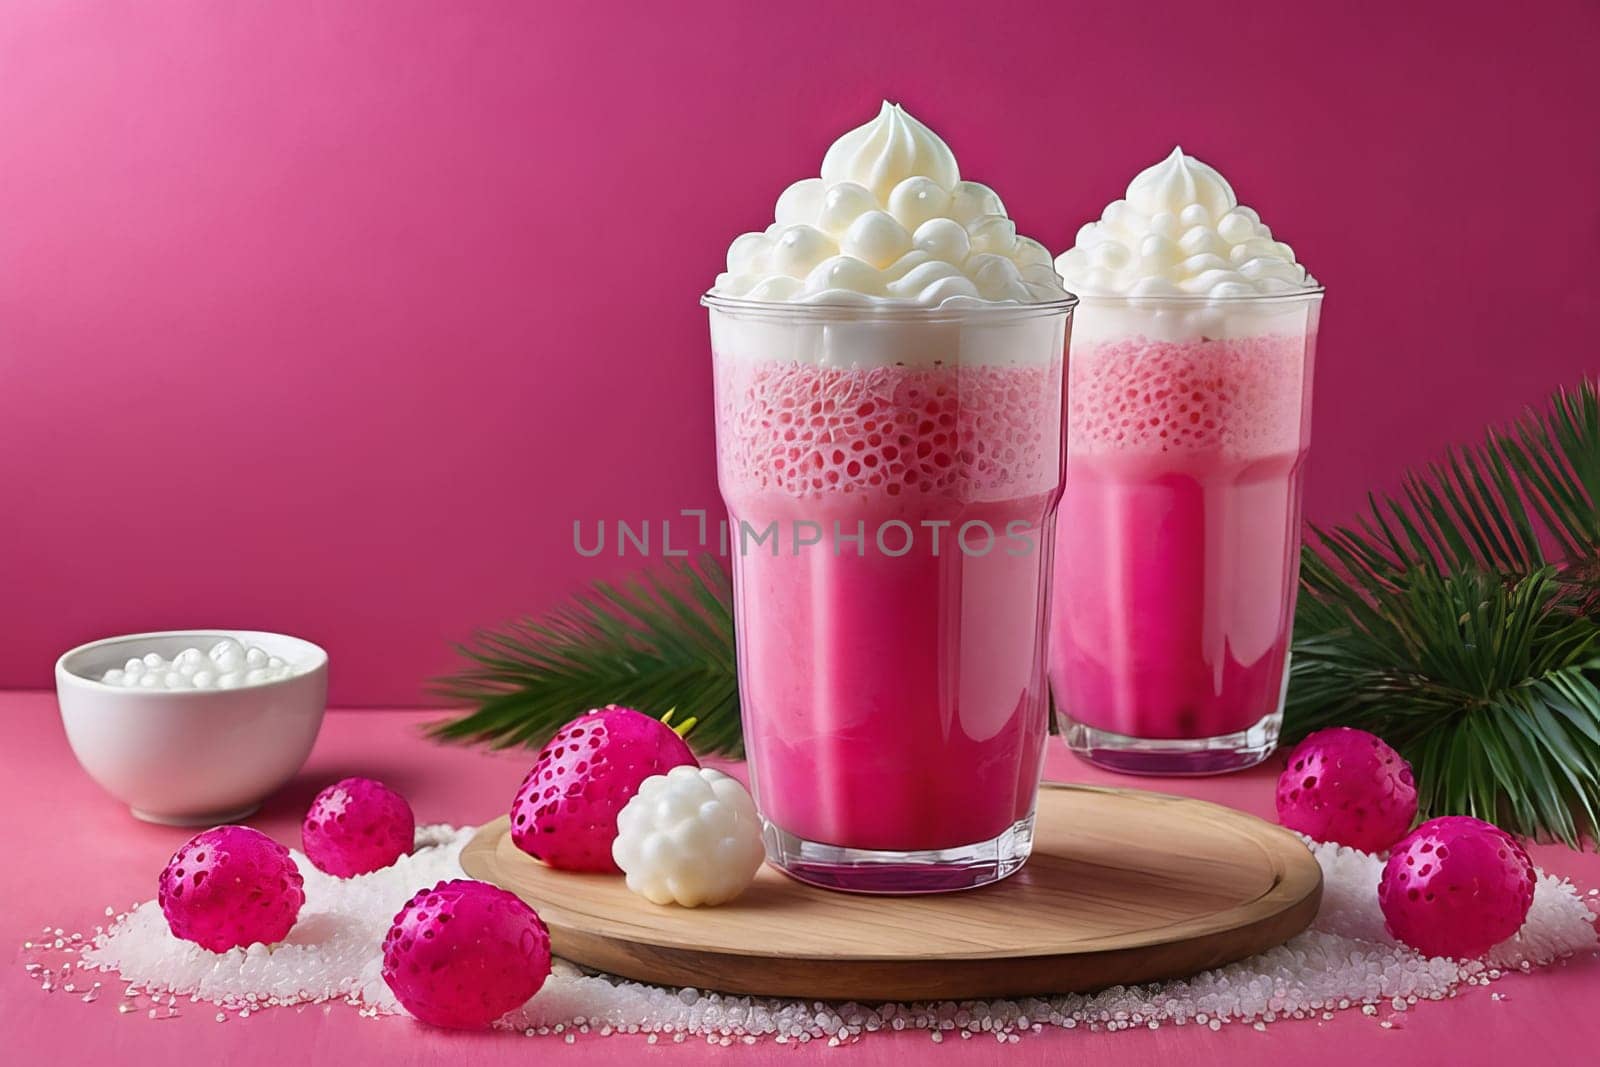 Lush pink bubble tea adorned with fluffy whipped cream and chewy tapioca pearls on a festive backdrop. by Annu1tochka